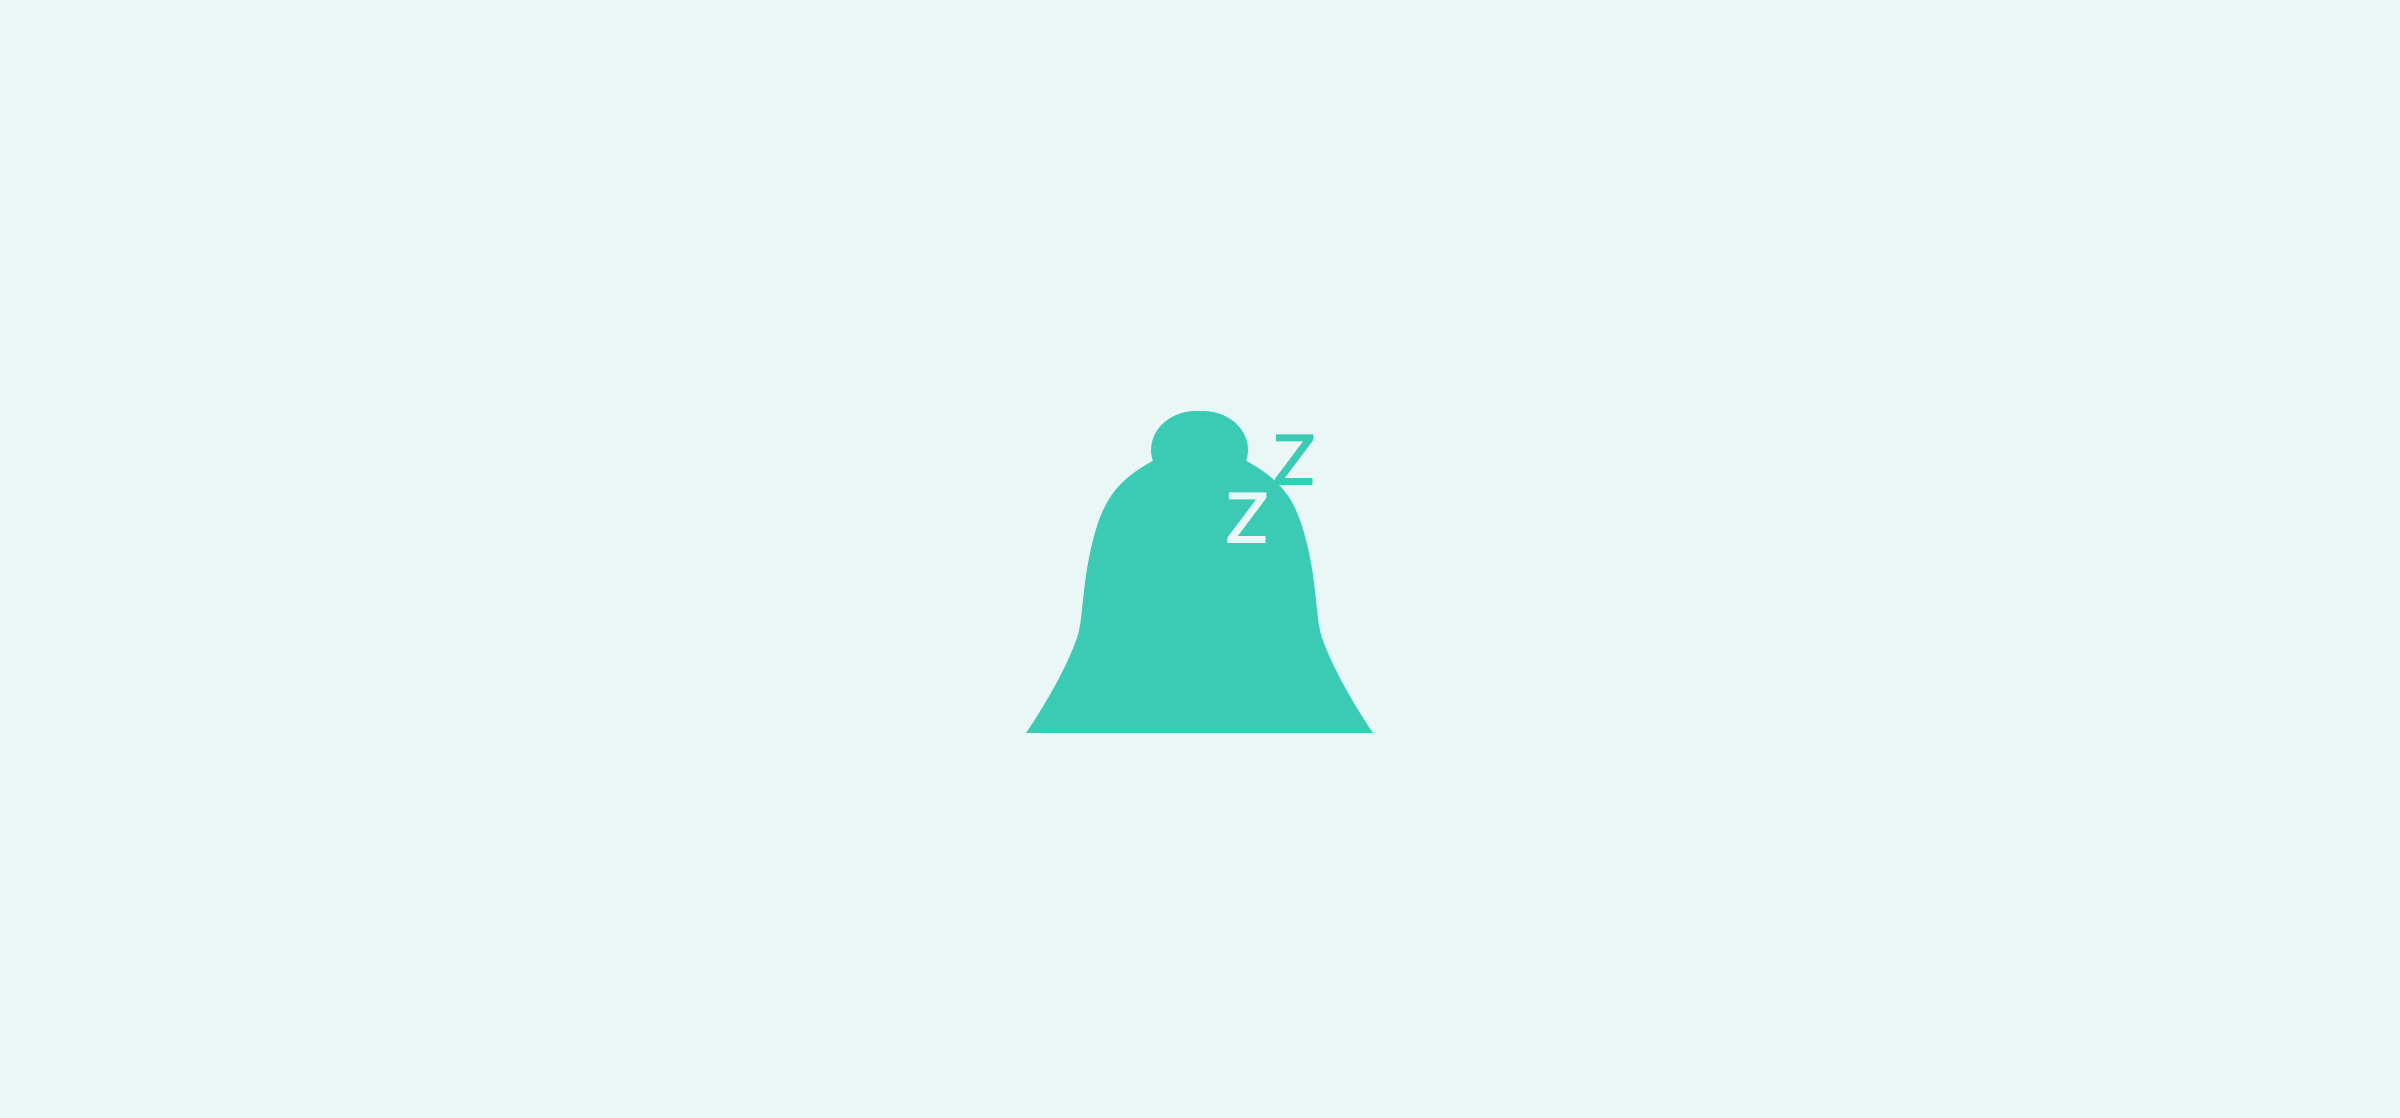 A sleeping bell, representing getting rid of workplace distractions